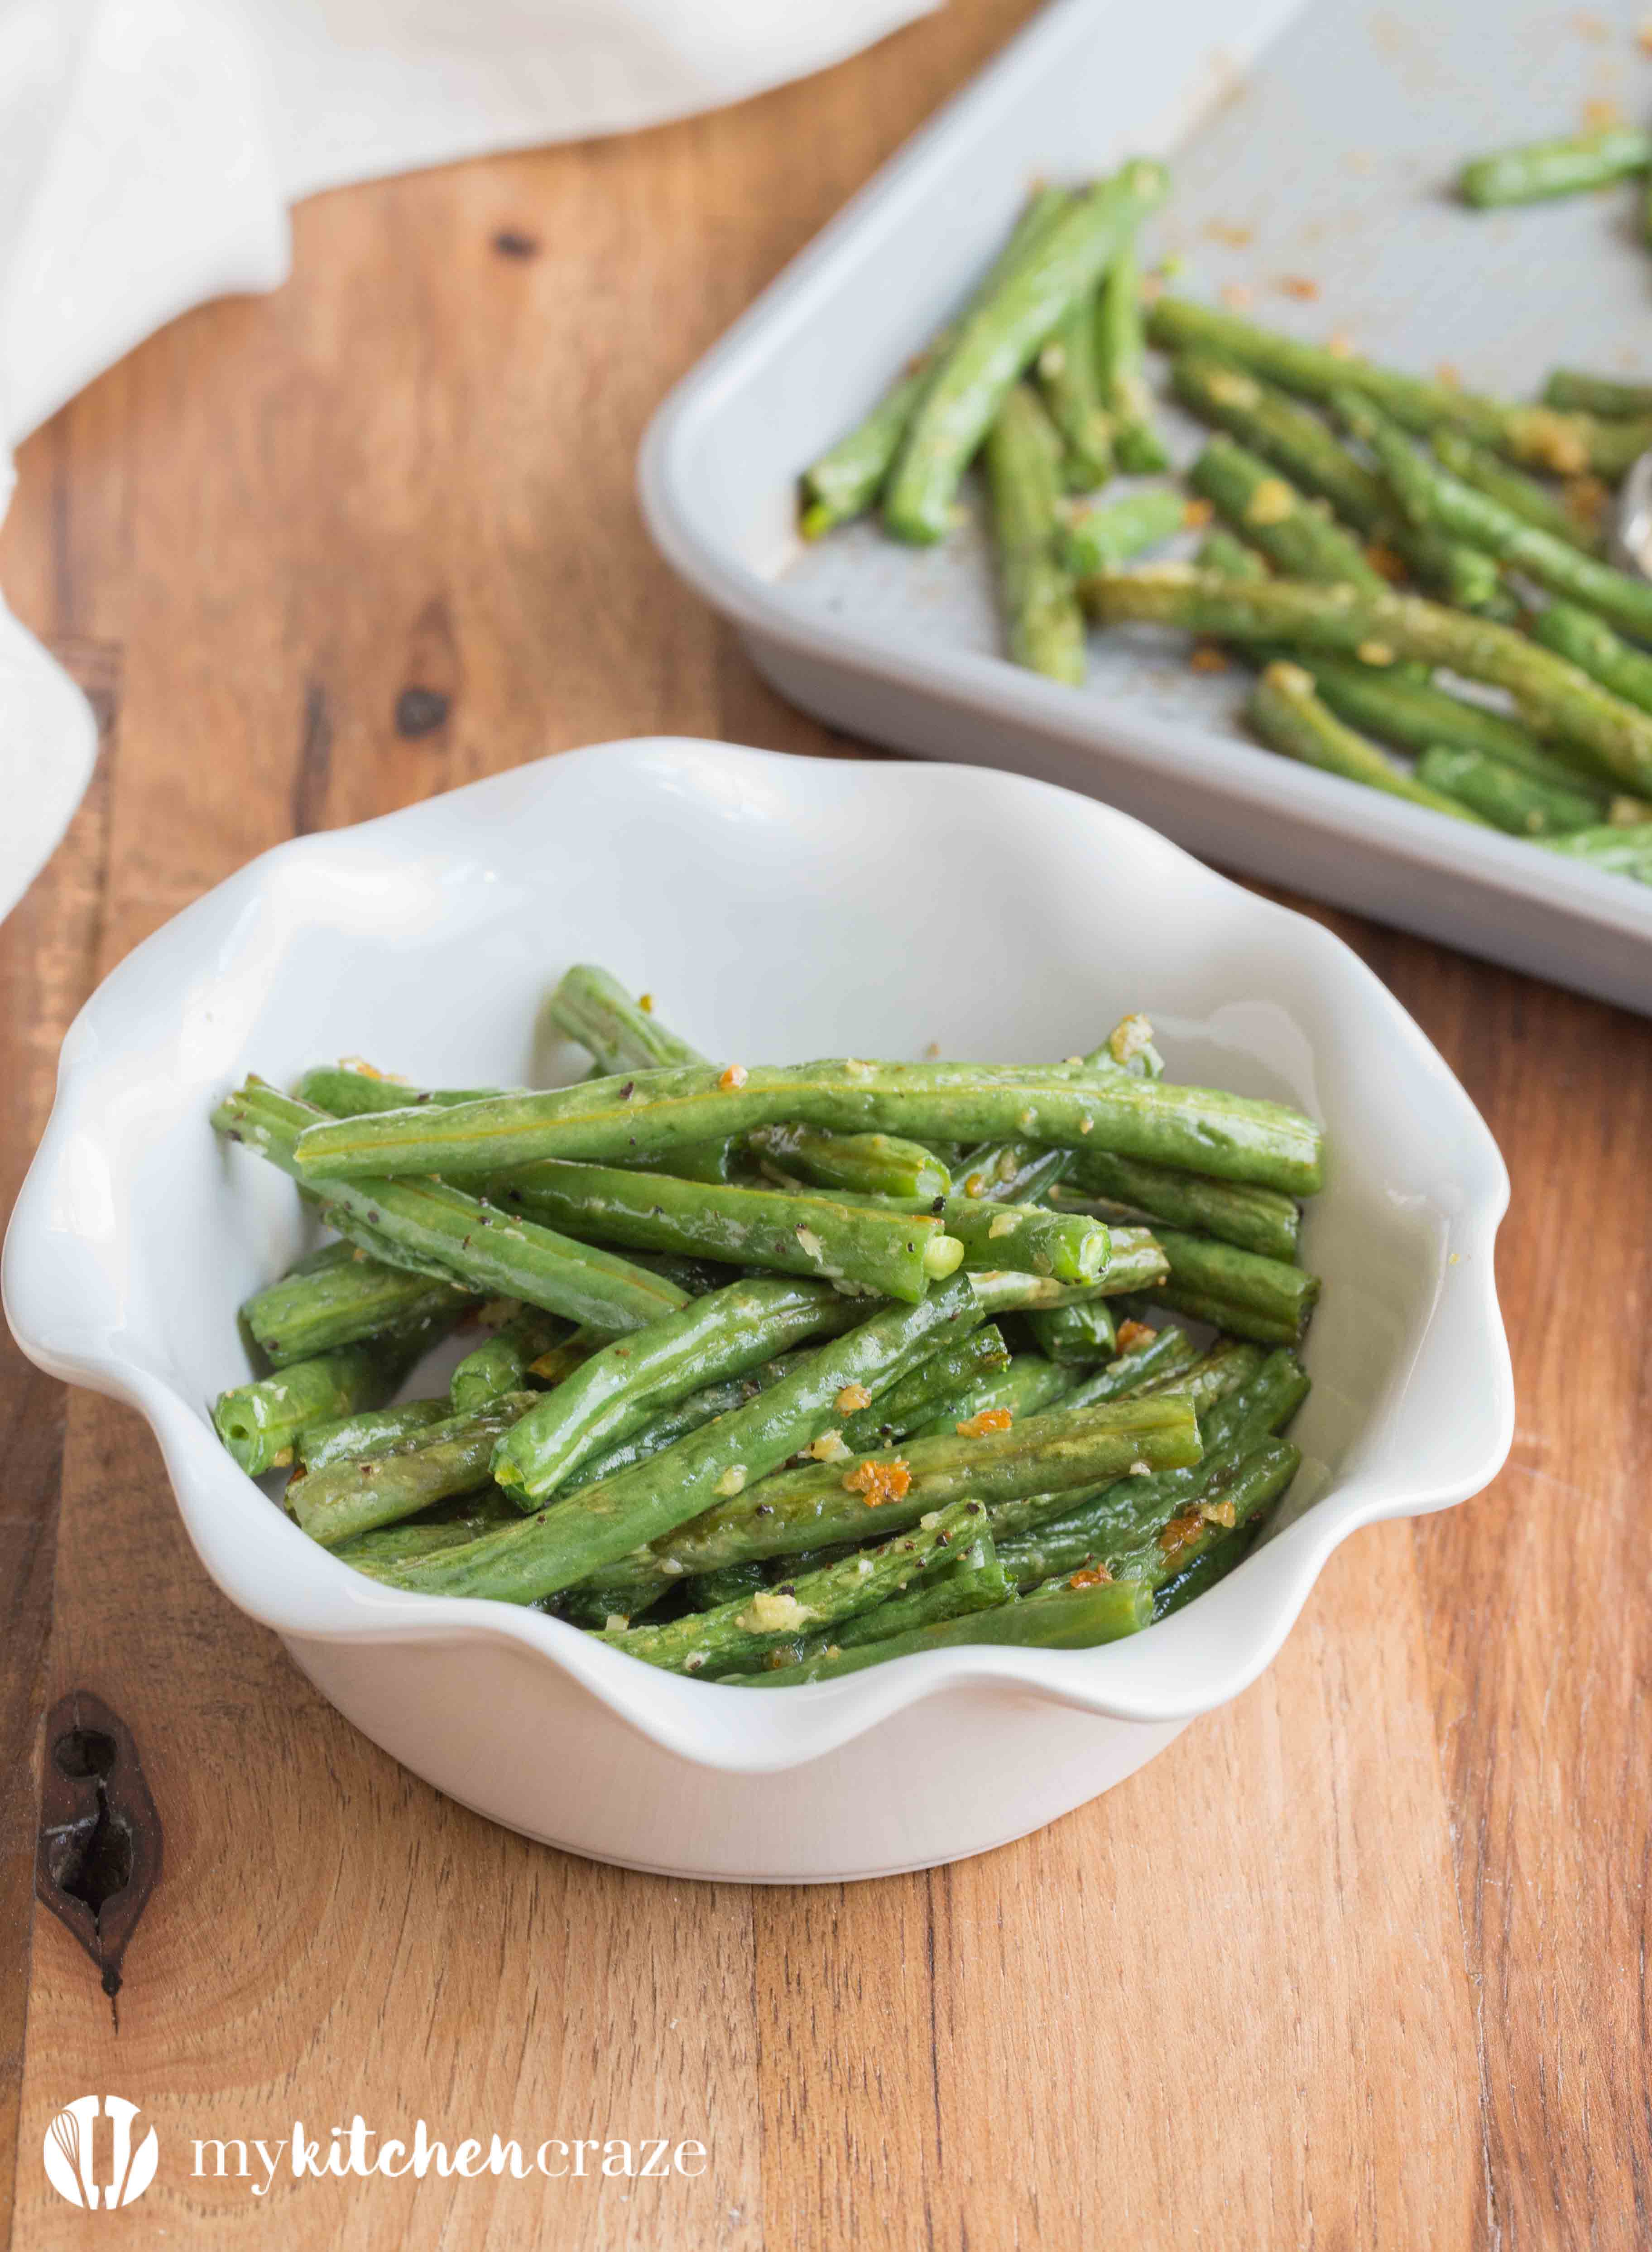 Baked Garlic Green Beans are a simple and delicious side dish that will compliment any main entree. Crunchy green beans and roasted garlic, make this one easy yummy side!